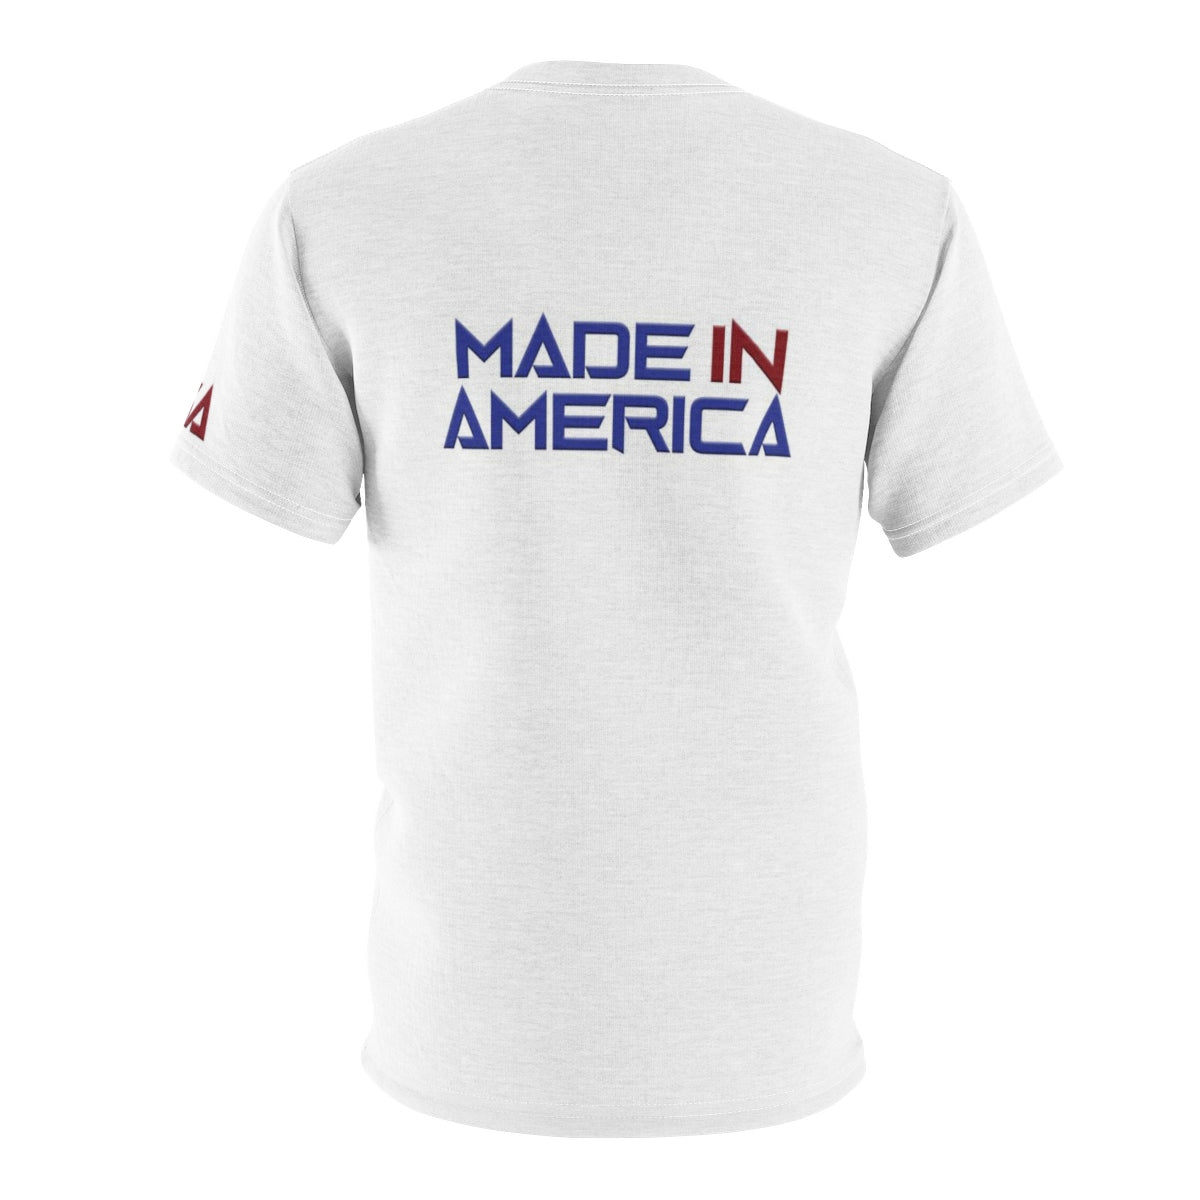 Our Troops First - "Made In The USA"